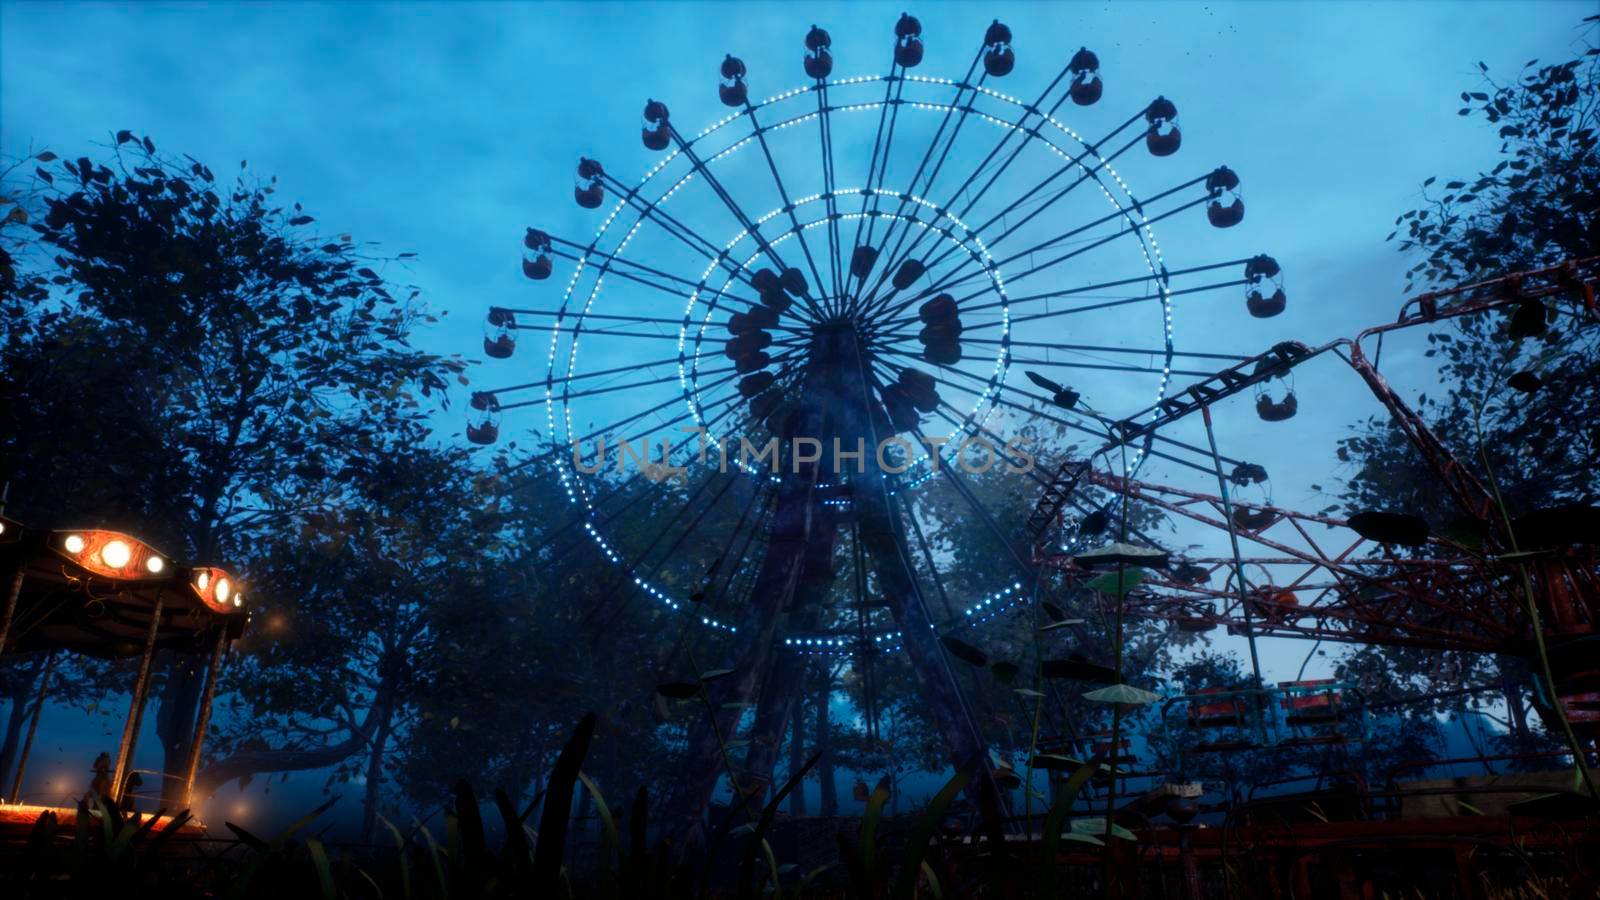 Abandoned Apocalyptic Ferris wheel and carousel in an amusement Park in a city deserted after the Apocalypse.